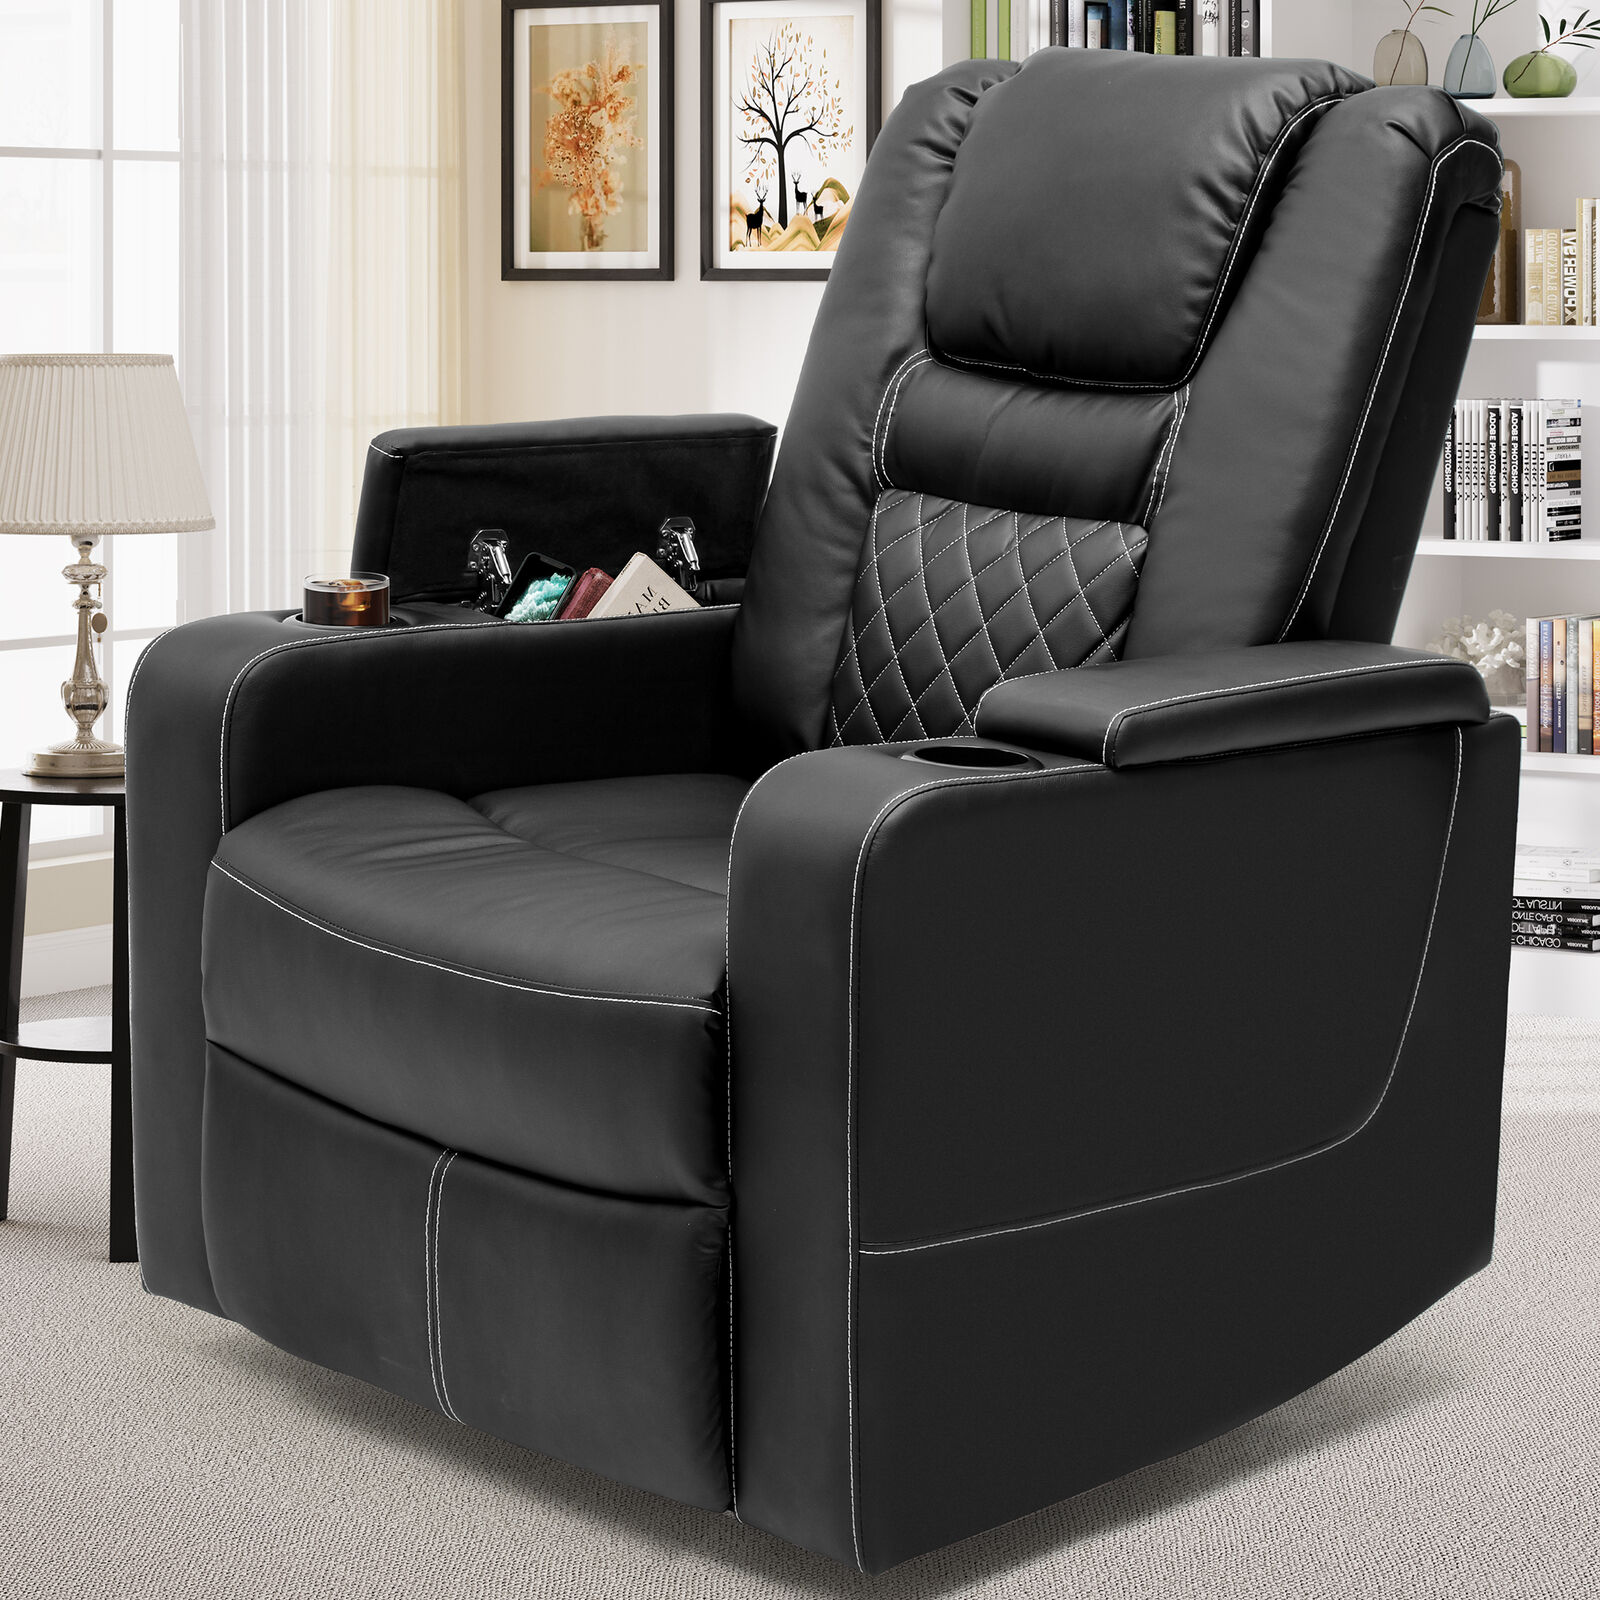 Swivel Glider Rocker Recliner Chair with Cup Holders, Home Theater Seating Soft